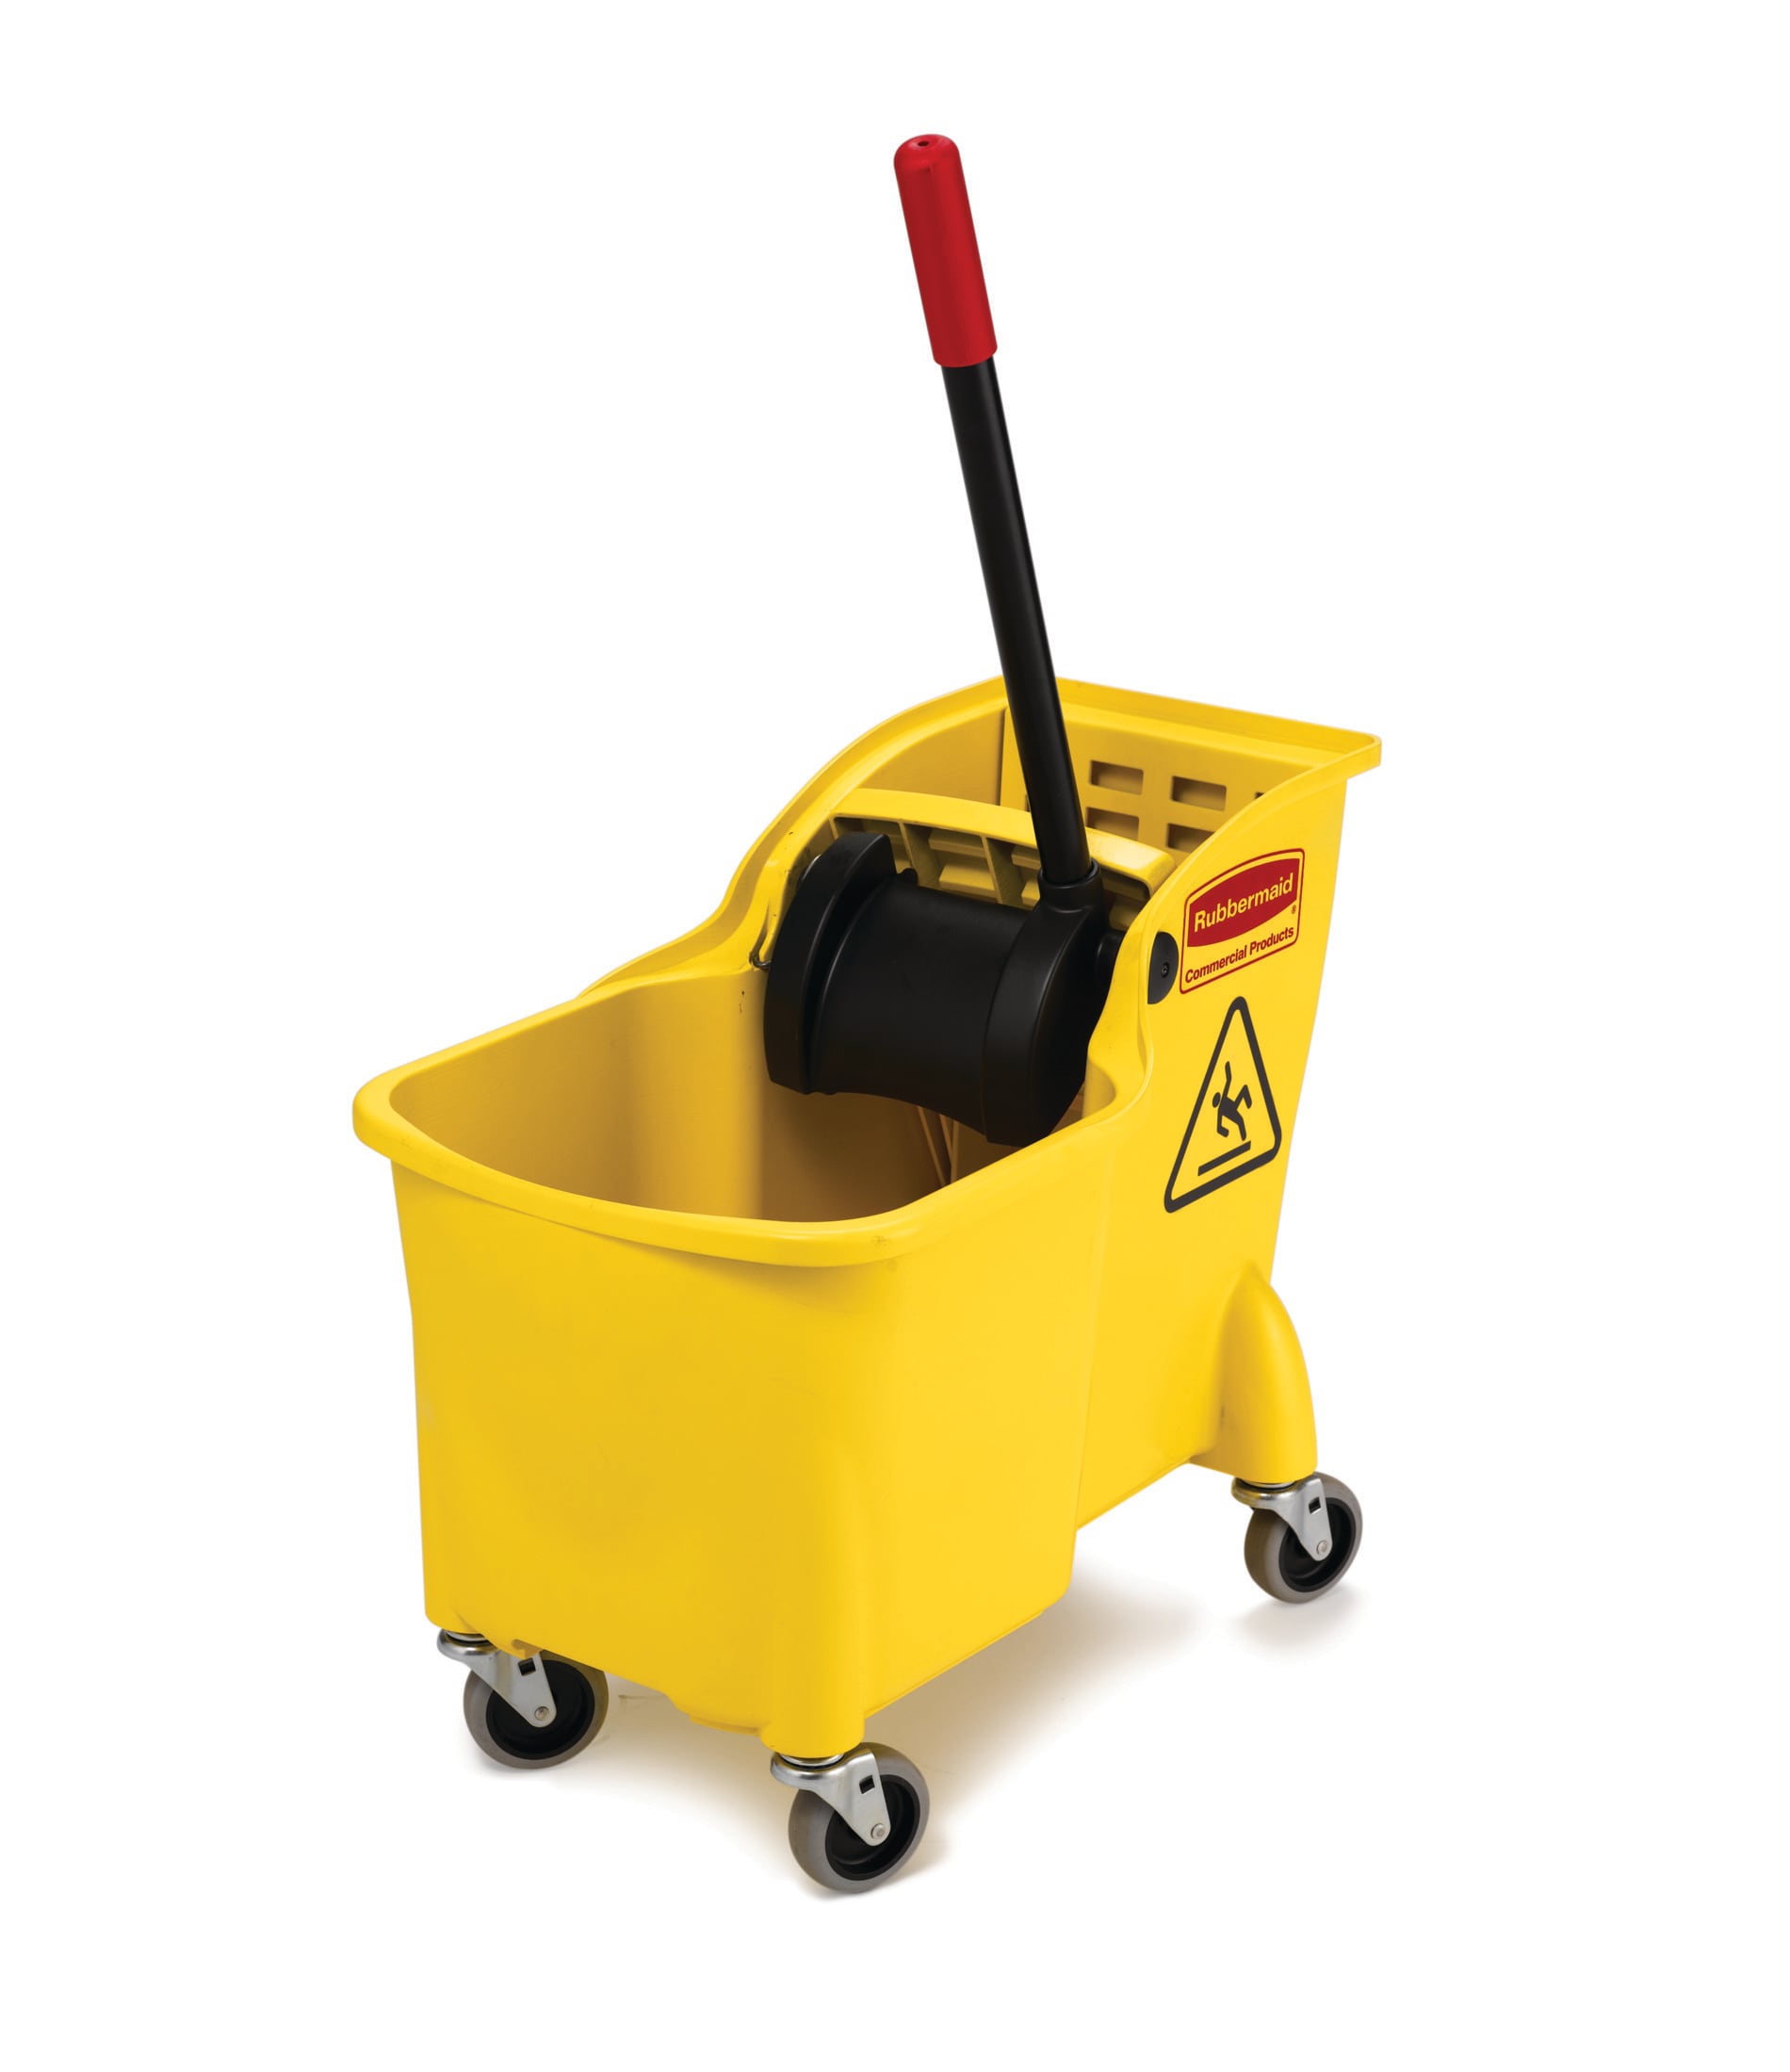 31-Quart Commercial Mop Wringer Bucket with Wheels Janitor Floor Cleaning Tool 